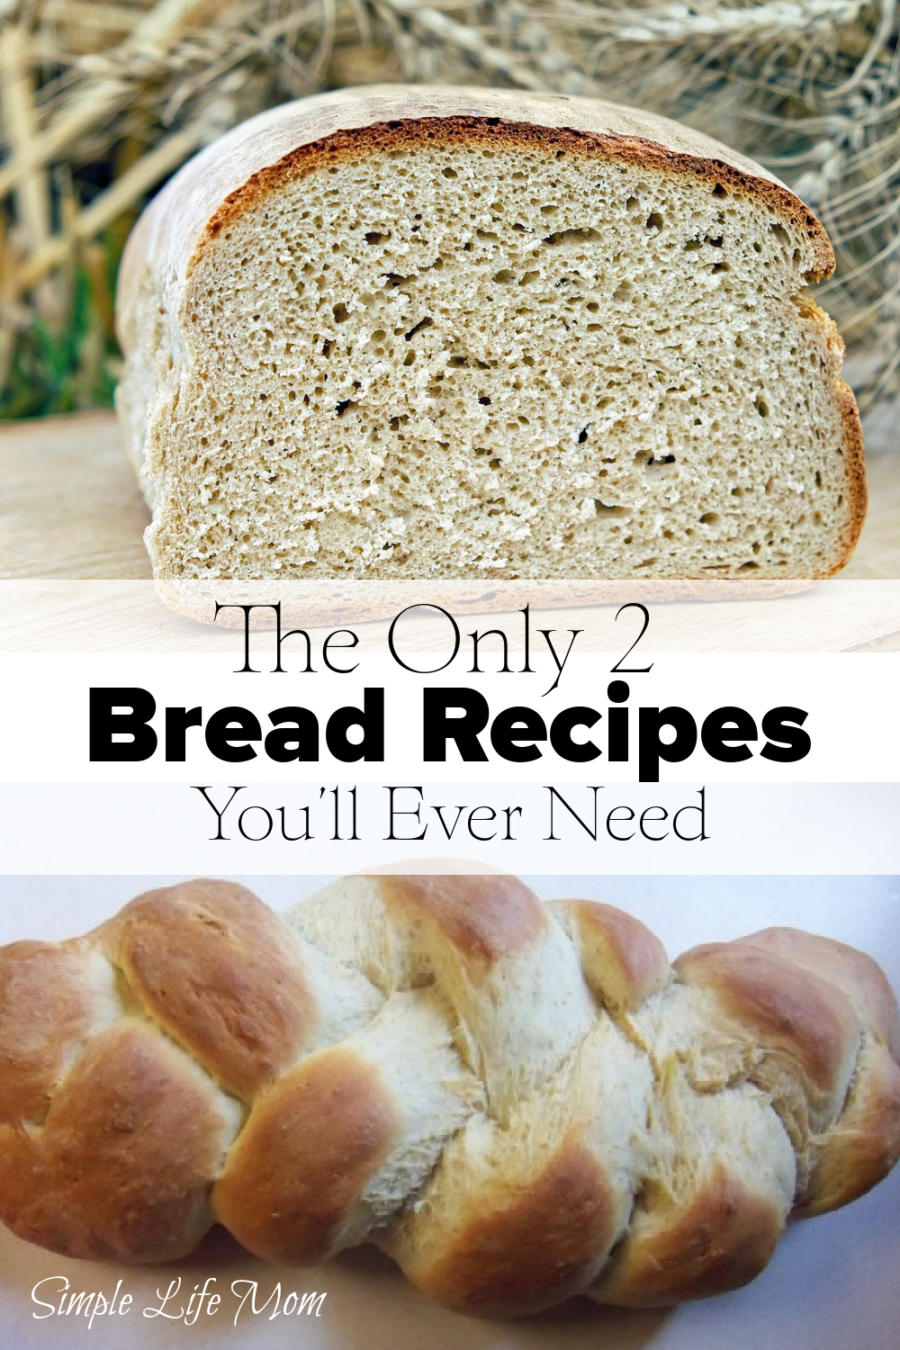 The Only 2 Bread Recipes You'll Ever Need from Simple Life Mom